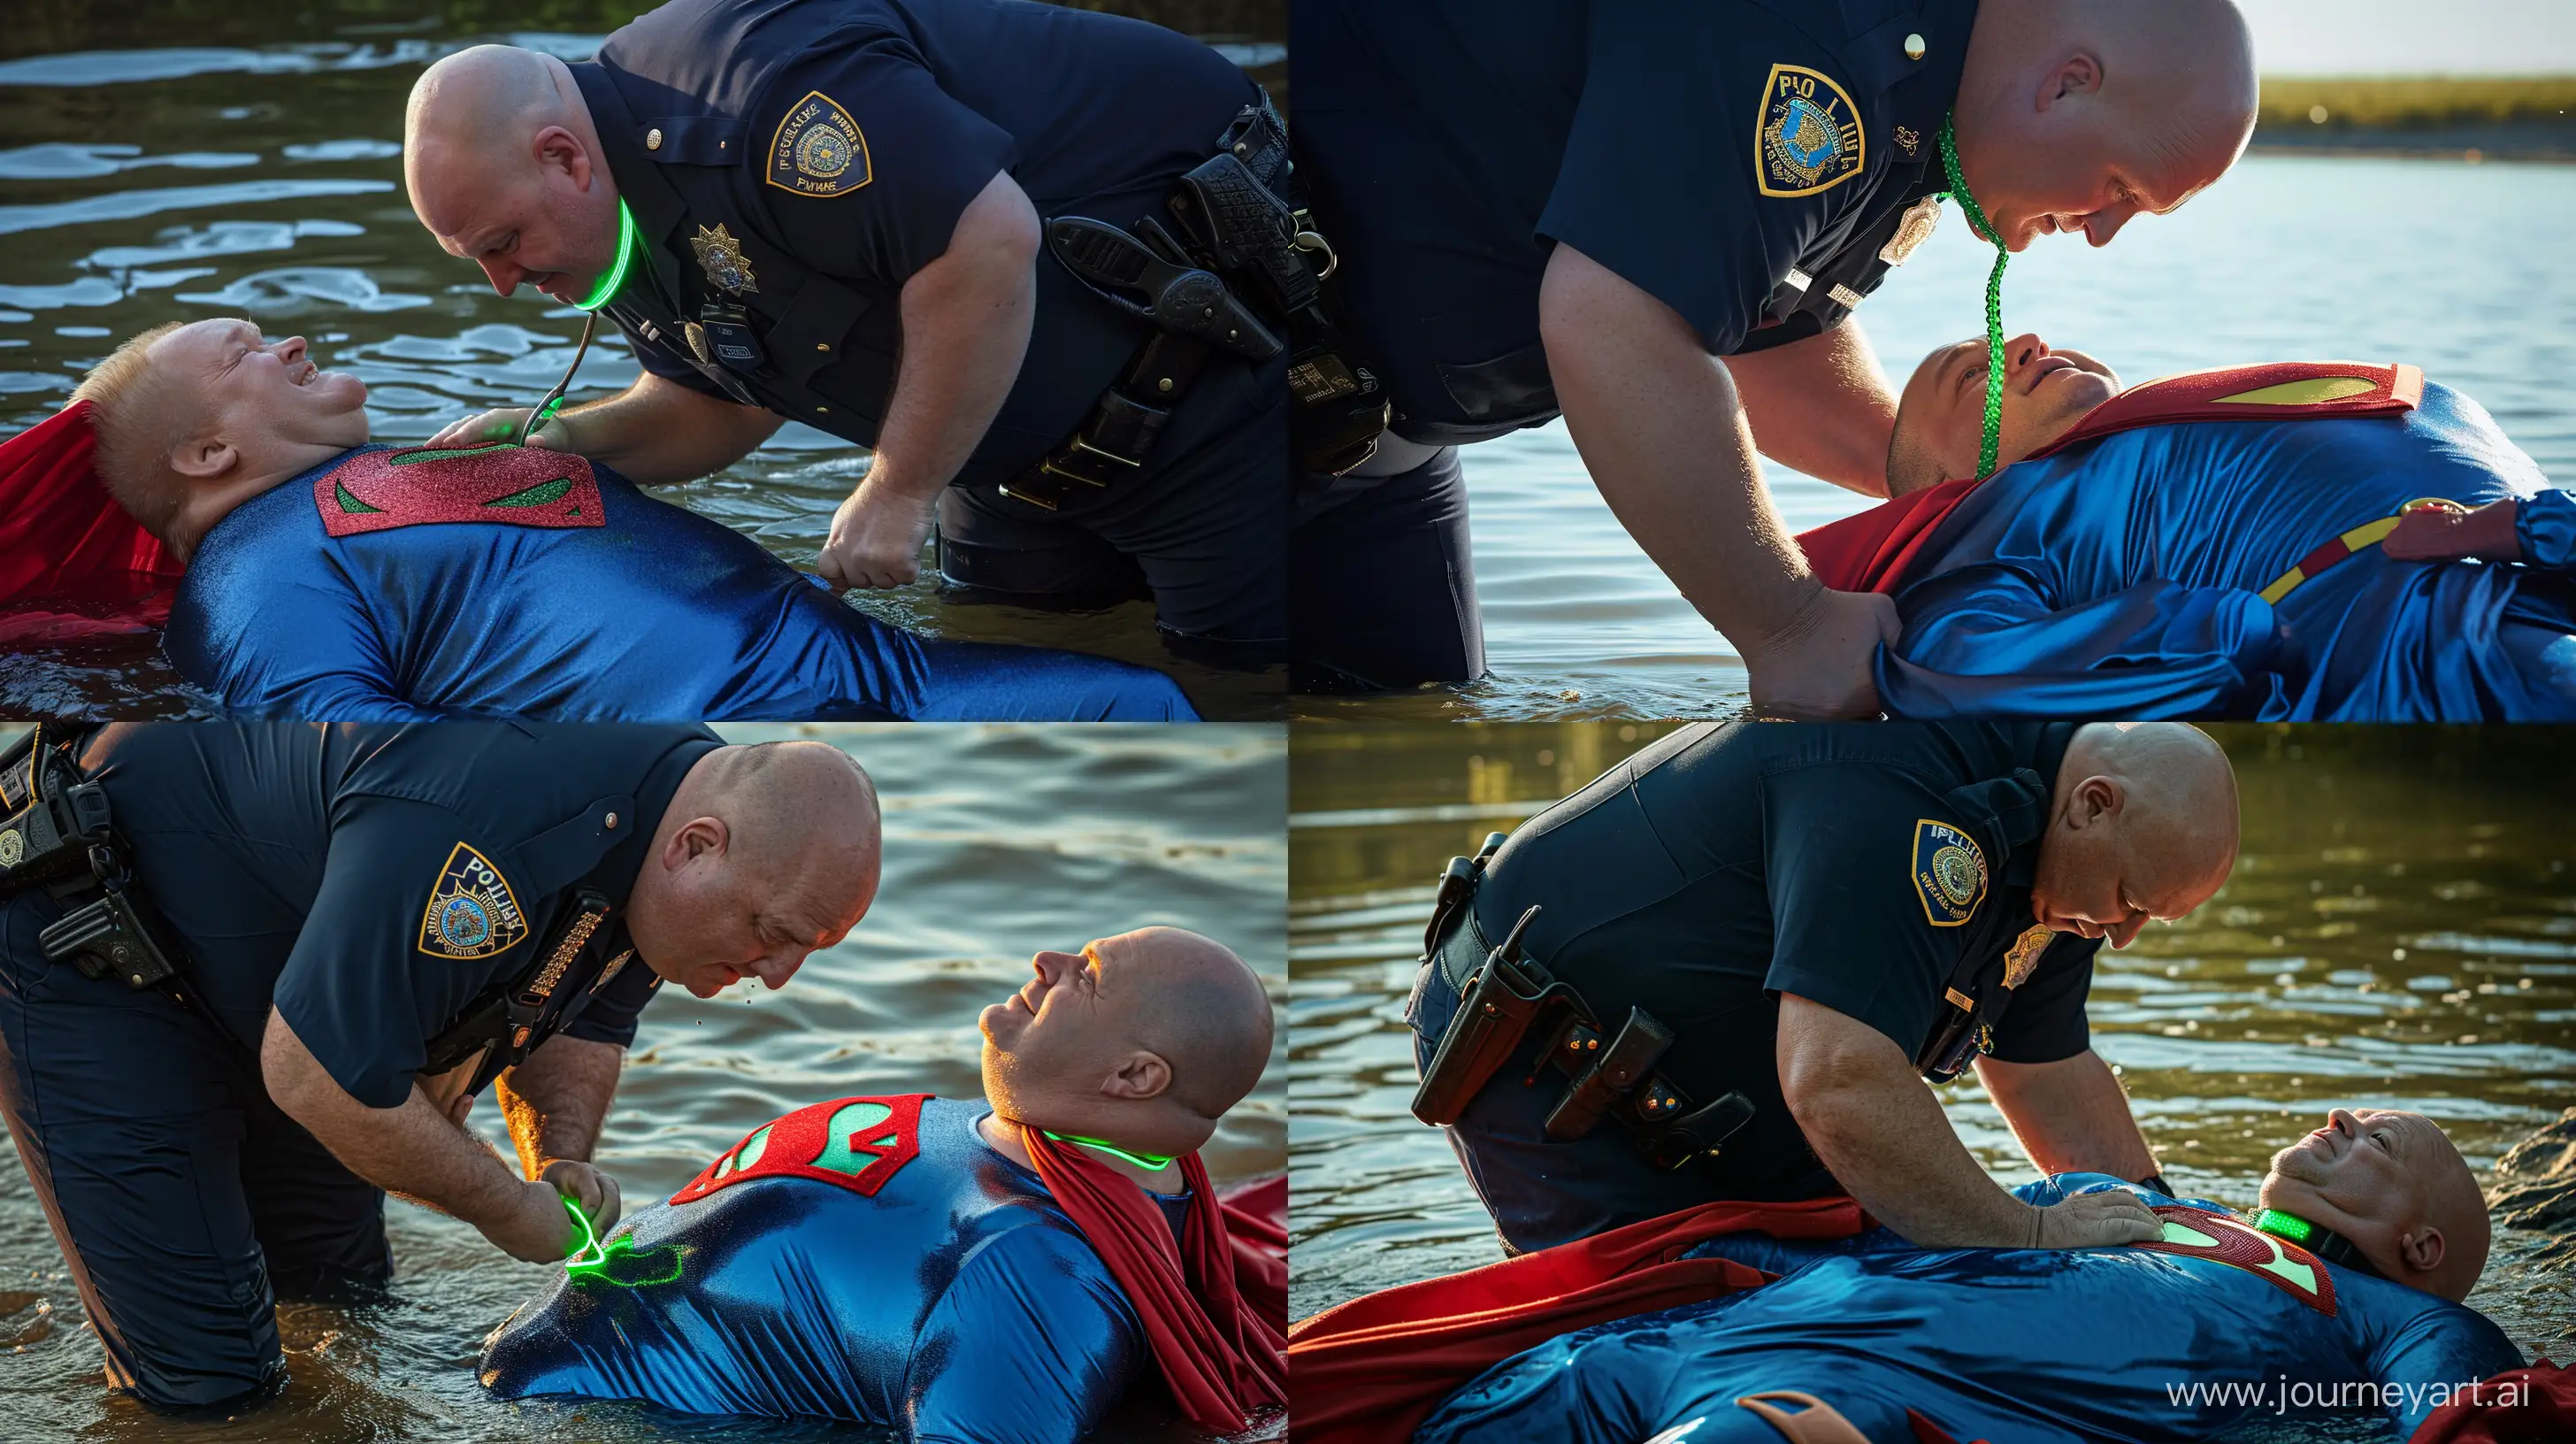 Senior-Police-Officer-Fastens-Glowing-Collar-on-Superman-in-Water